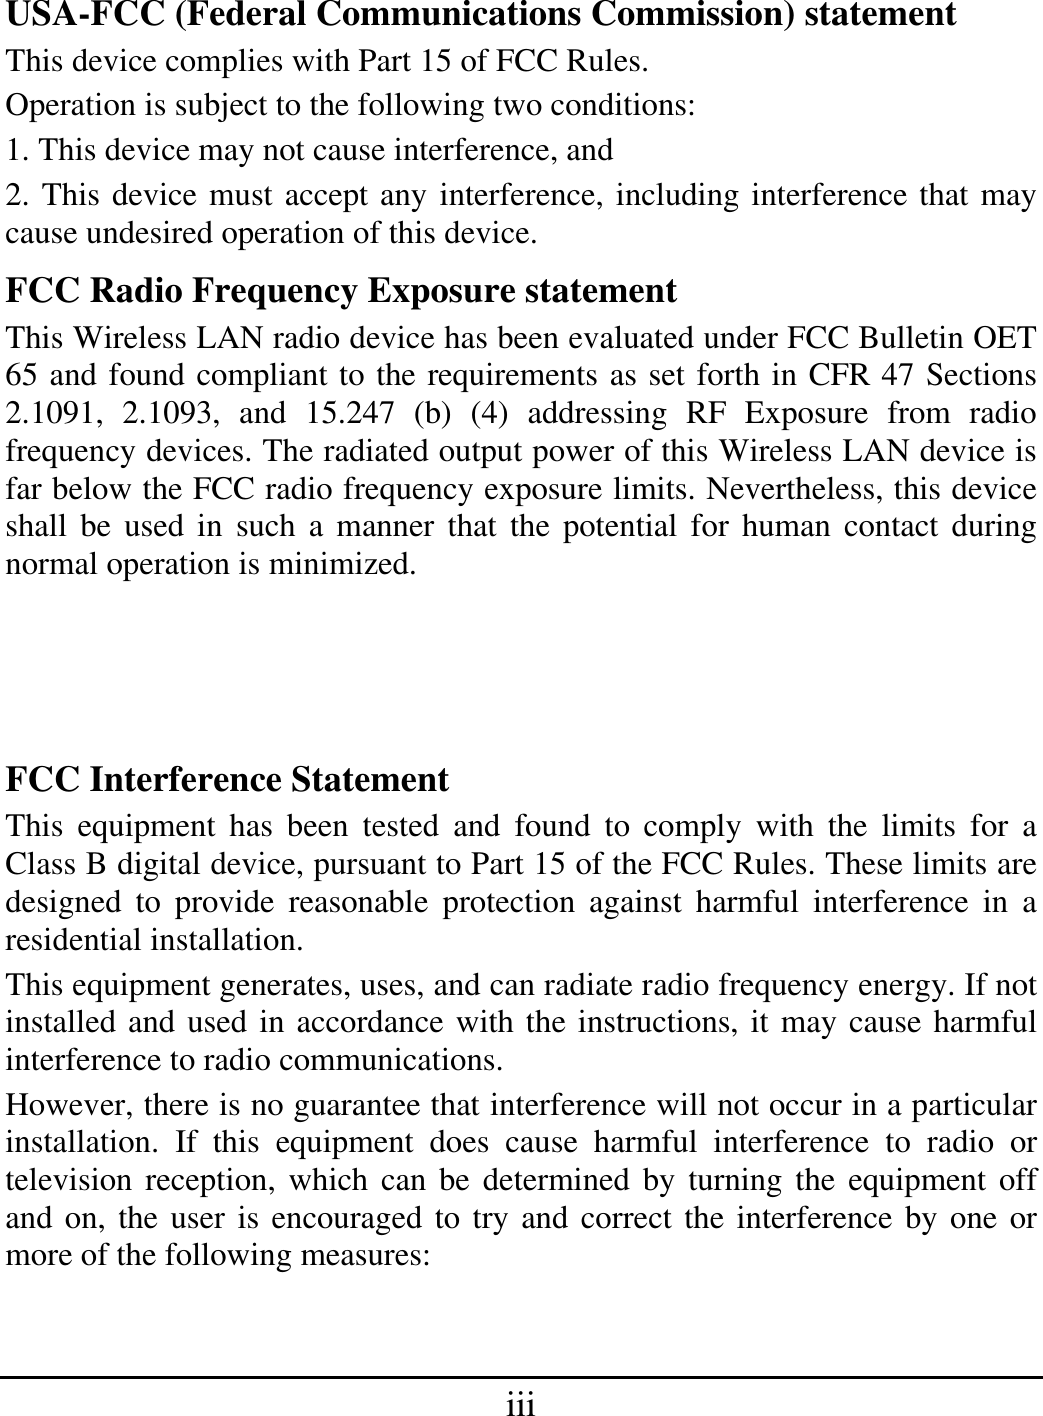 iii USA-FCC (Federal Communications Commission) statement This device complies with Part 15 of FCC Rules. Operation is subject to the following two conditions: 1. This device may not cause interference, and 2. This device must accept any interference, including interference that may cause undesired operation of this device. FCC Radio Frequency Exposure statement This Wireless LAN radio device has been evaluated under FCC Bulletin OET 65 and found compliant to the requirements as set forth in CFR 47 Sections 2.1091, 2.1093, and 15.247 (b) (4) addressing RF Exposure from radio frequency devices. The radiated output power of this Wireless LAN device is far below the FCC radio frequency exposure limits. Nevertheless, this device shall be used in such a manner that the potential for human contact during normal operation is minimized. FCC Interference Statement This equipment has been tested and found to comply with the limits for a Class B digital device, pursuant to Part 15 of the FCC Rules. These limits are designed to provide reasonable protection against harmful interference in a residential installation. This equipment generates, uses, and can radiate radio frequency energy. If not installed and used in accordance with the instructions, it may cause harmful interference to radio communications. However, there is no guarantee that interference will not occur in a particular installation. If this equipment does cause harmful interference to radio or television reception, which can be determined by turning the equipment off and on, the user is encouraged to try and correct the interference by one or more of the following measures:  